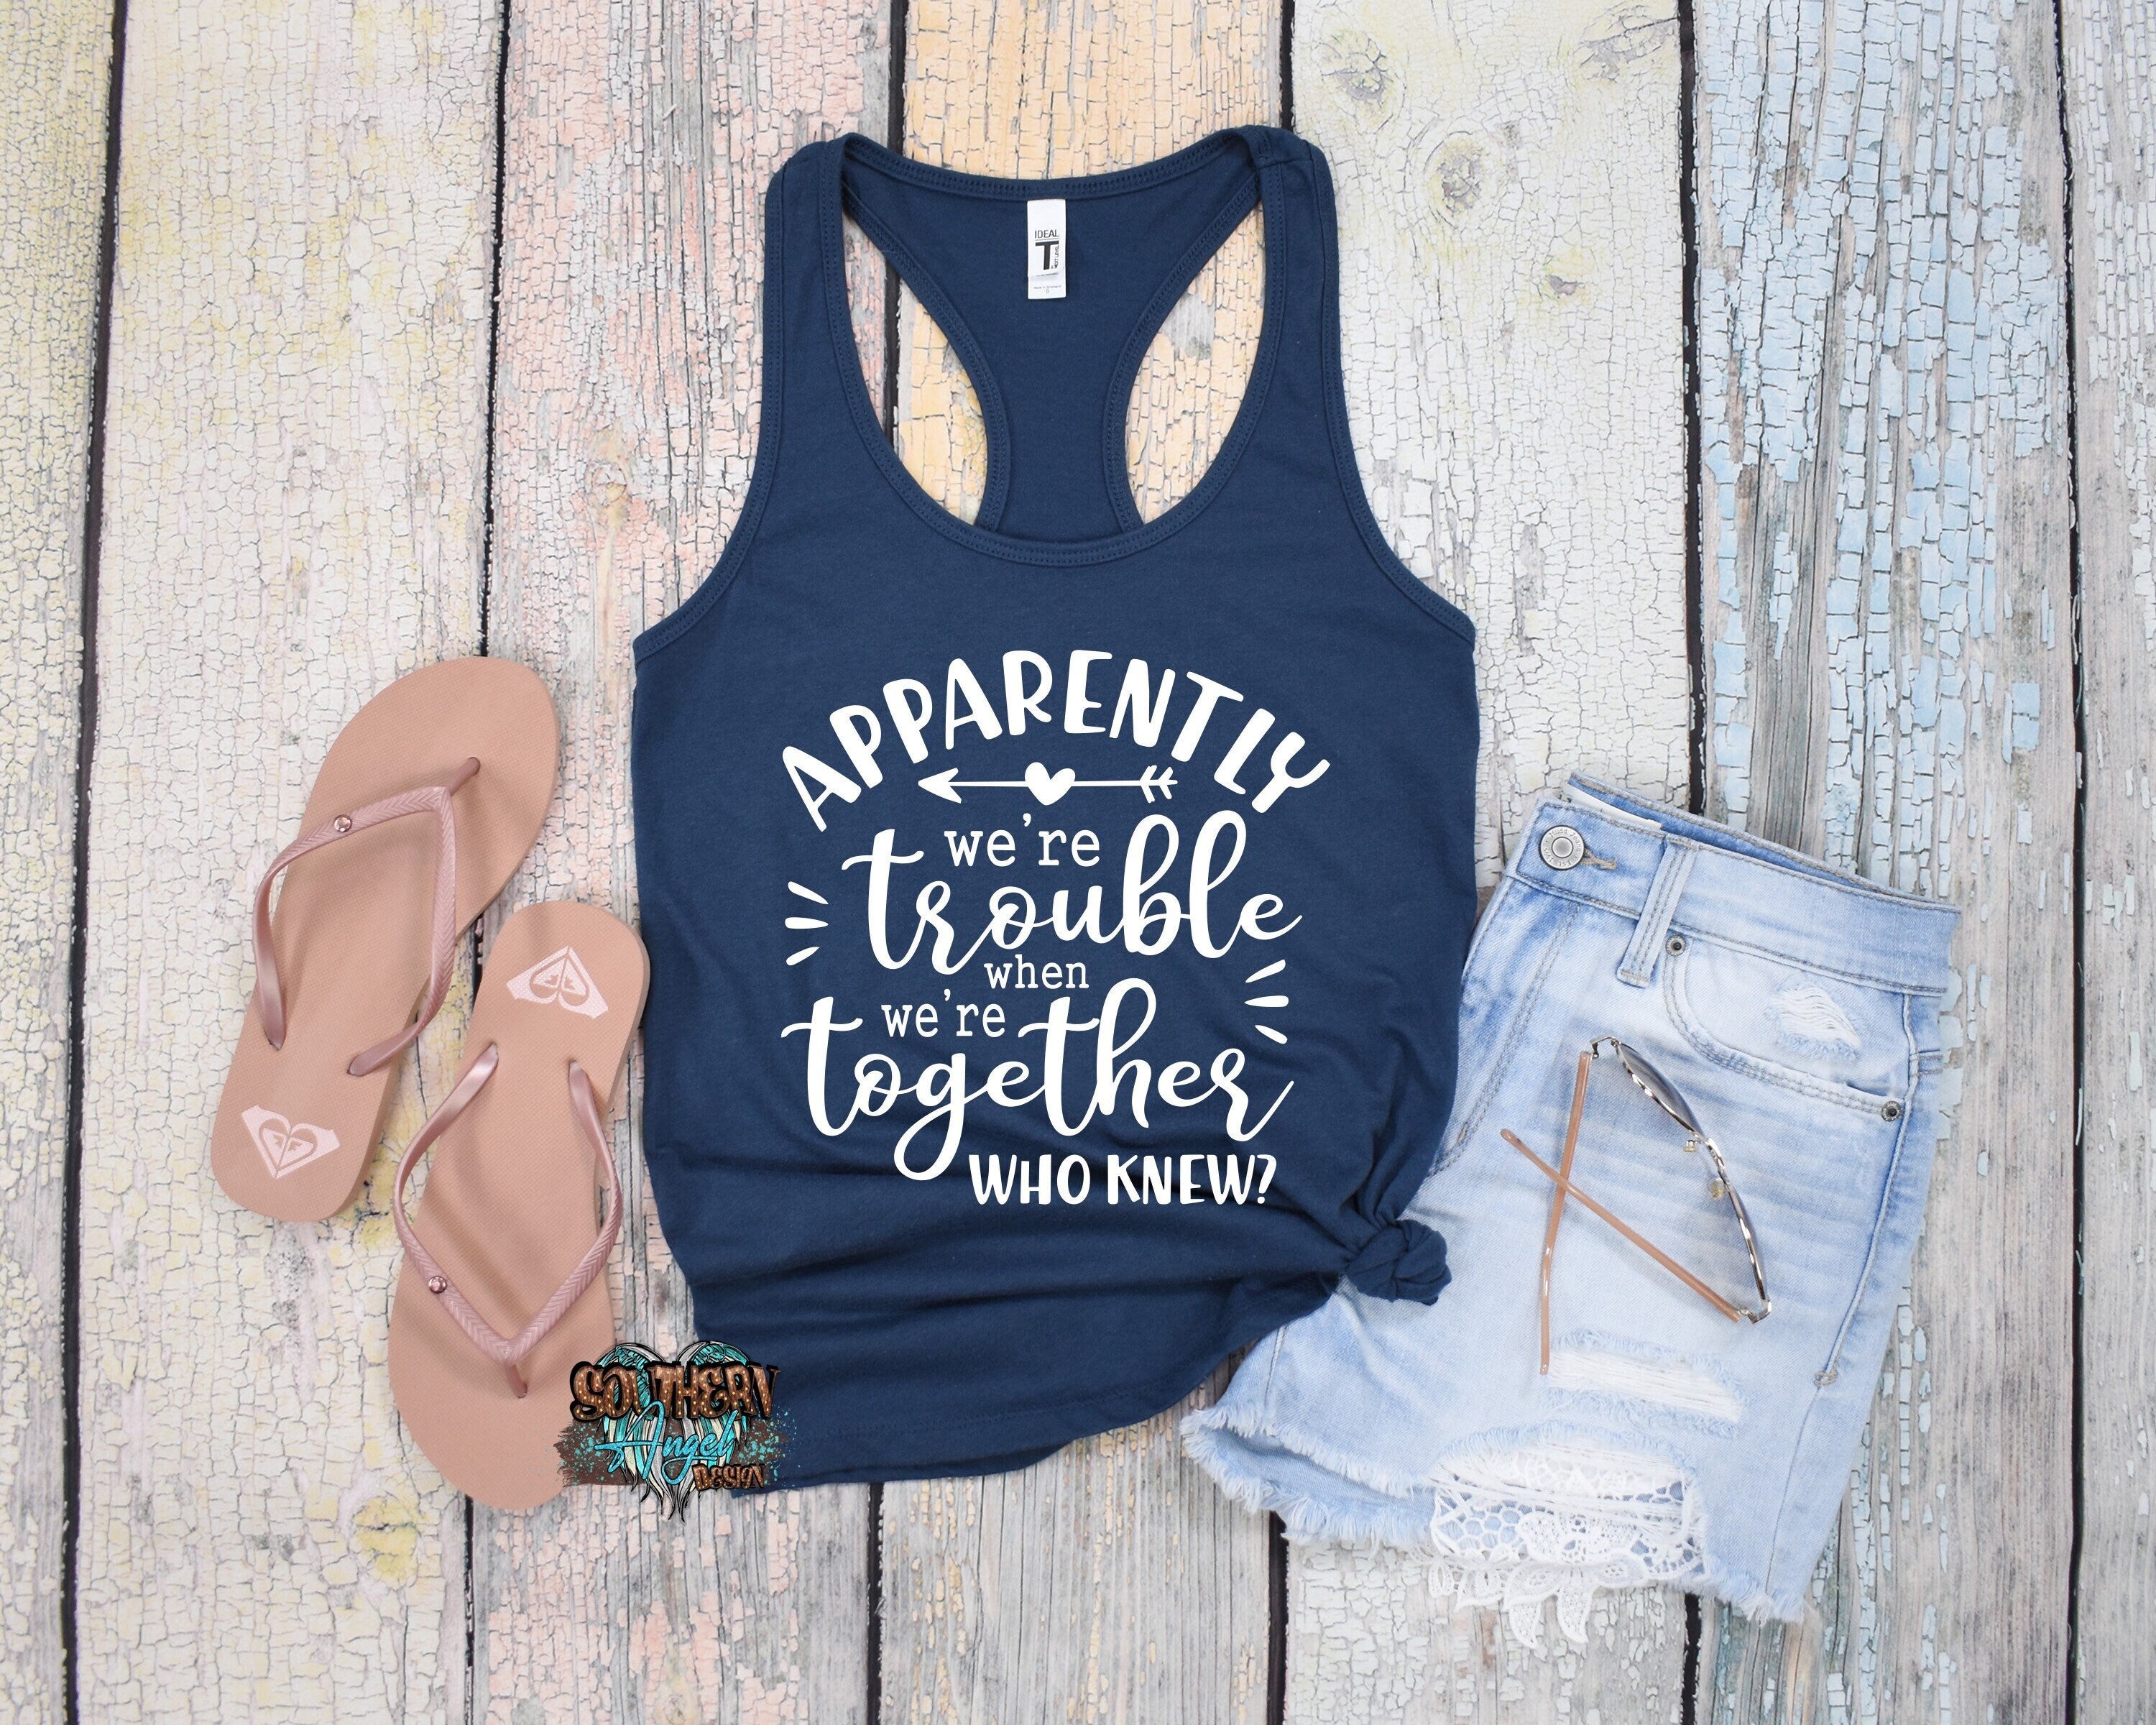 Trouble When We’re Together tank, Vacation tank, Girls trip shirt, bachelorette tank, summer tank top, Cruise shirt, Swimsuit coverup